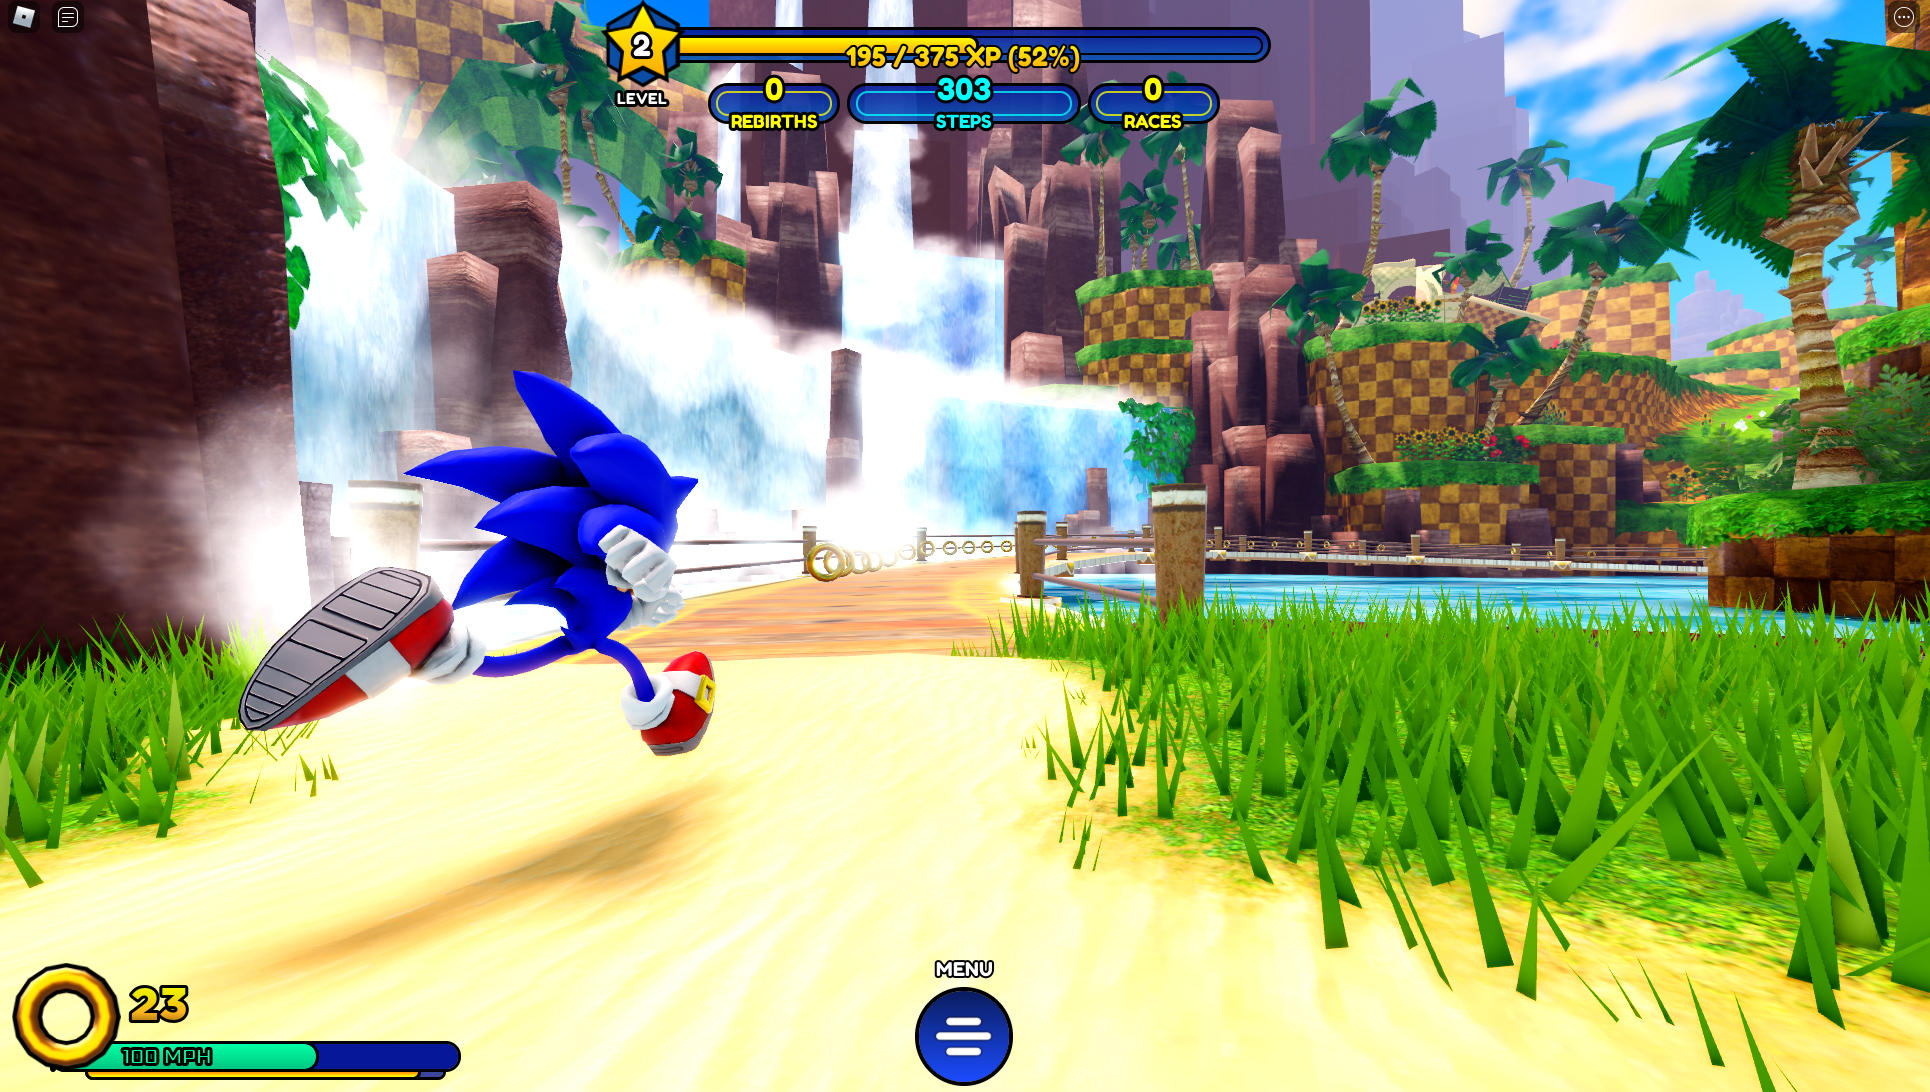 Sonic Speed Simulator review - a free, good-looking Roblox game